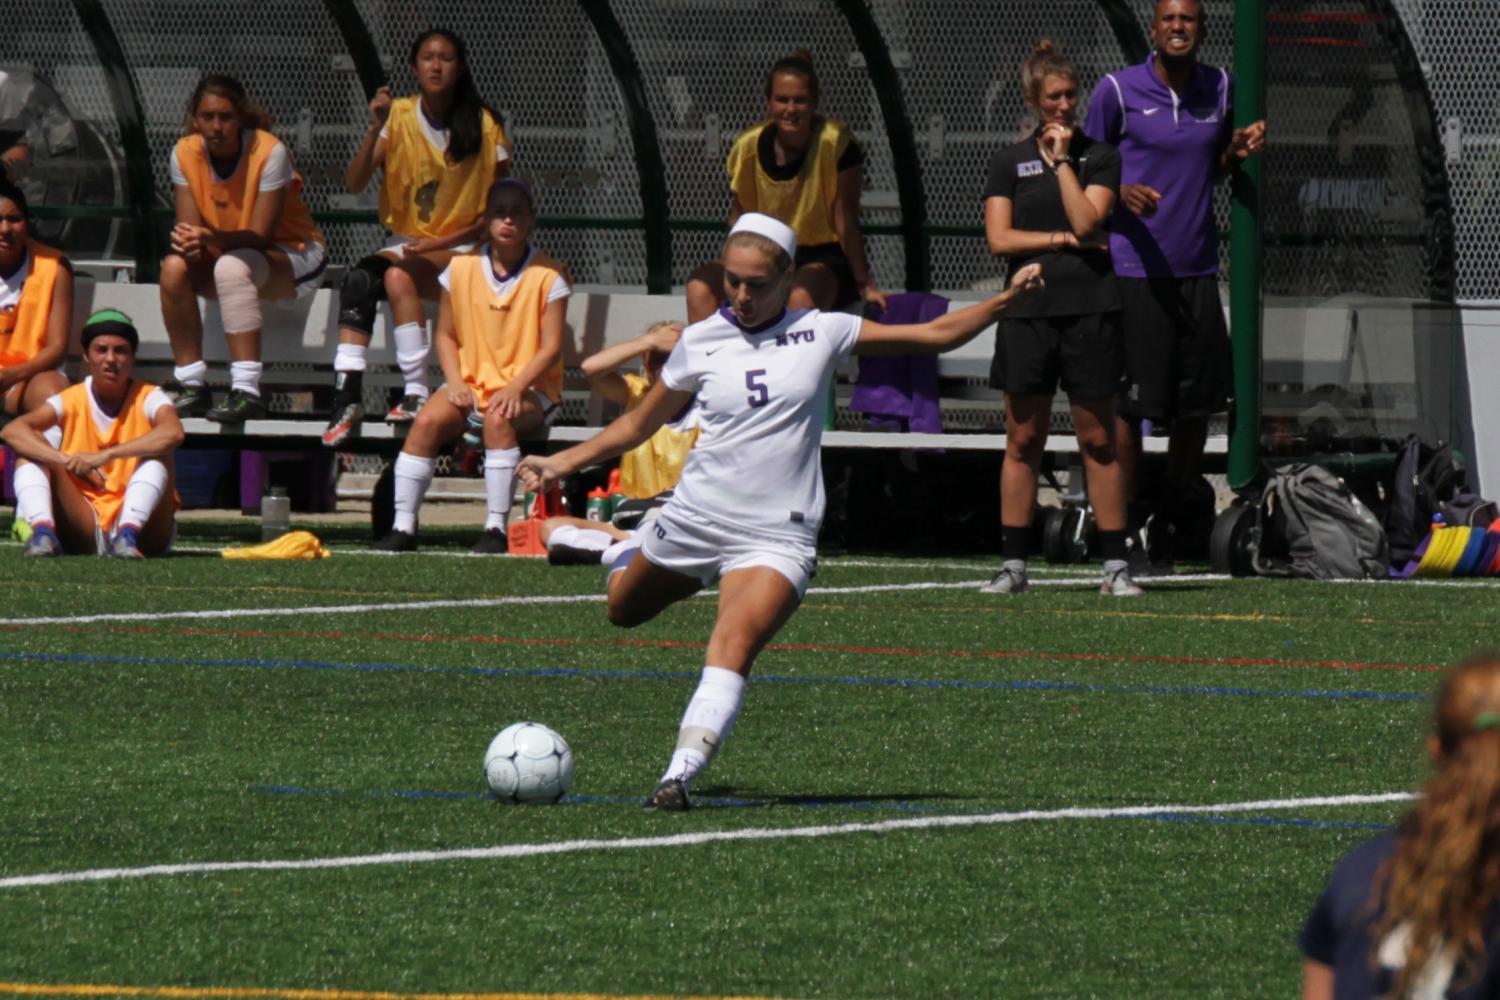 CAS sophomore Alex Benedict scored goals in both NYU’s games on Friday and Sunday.
